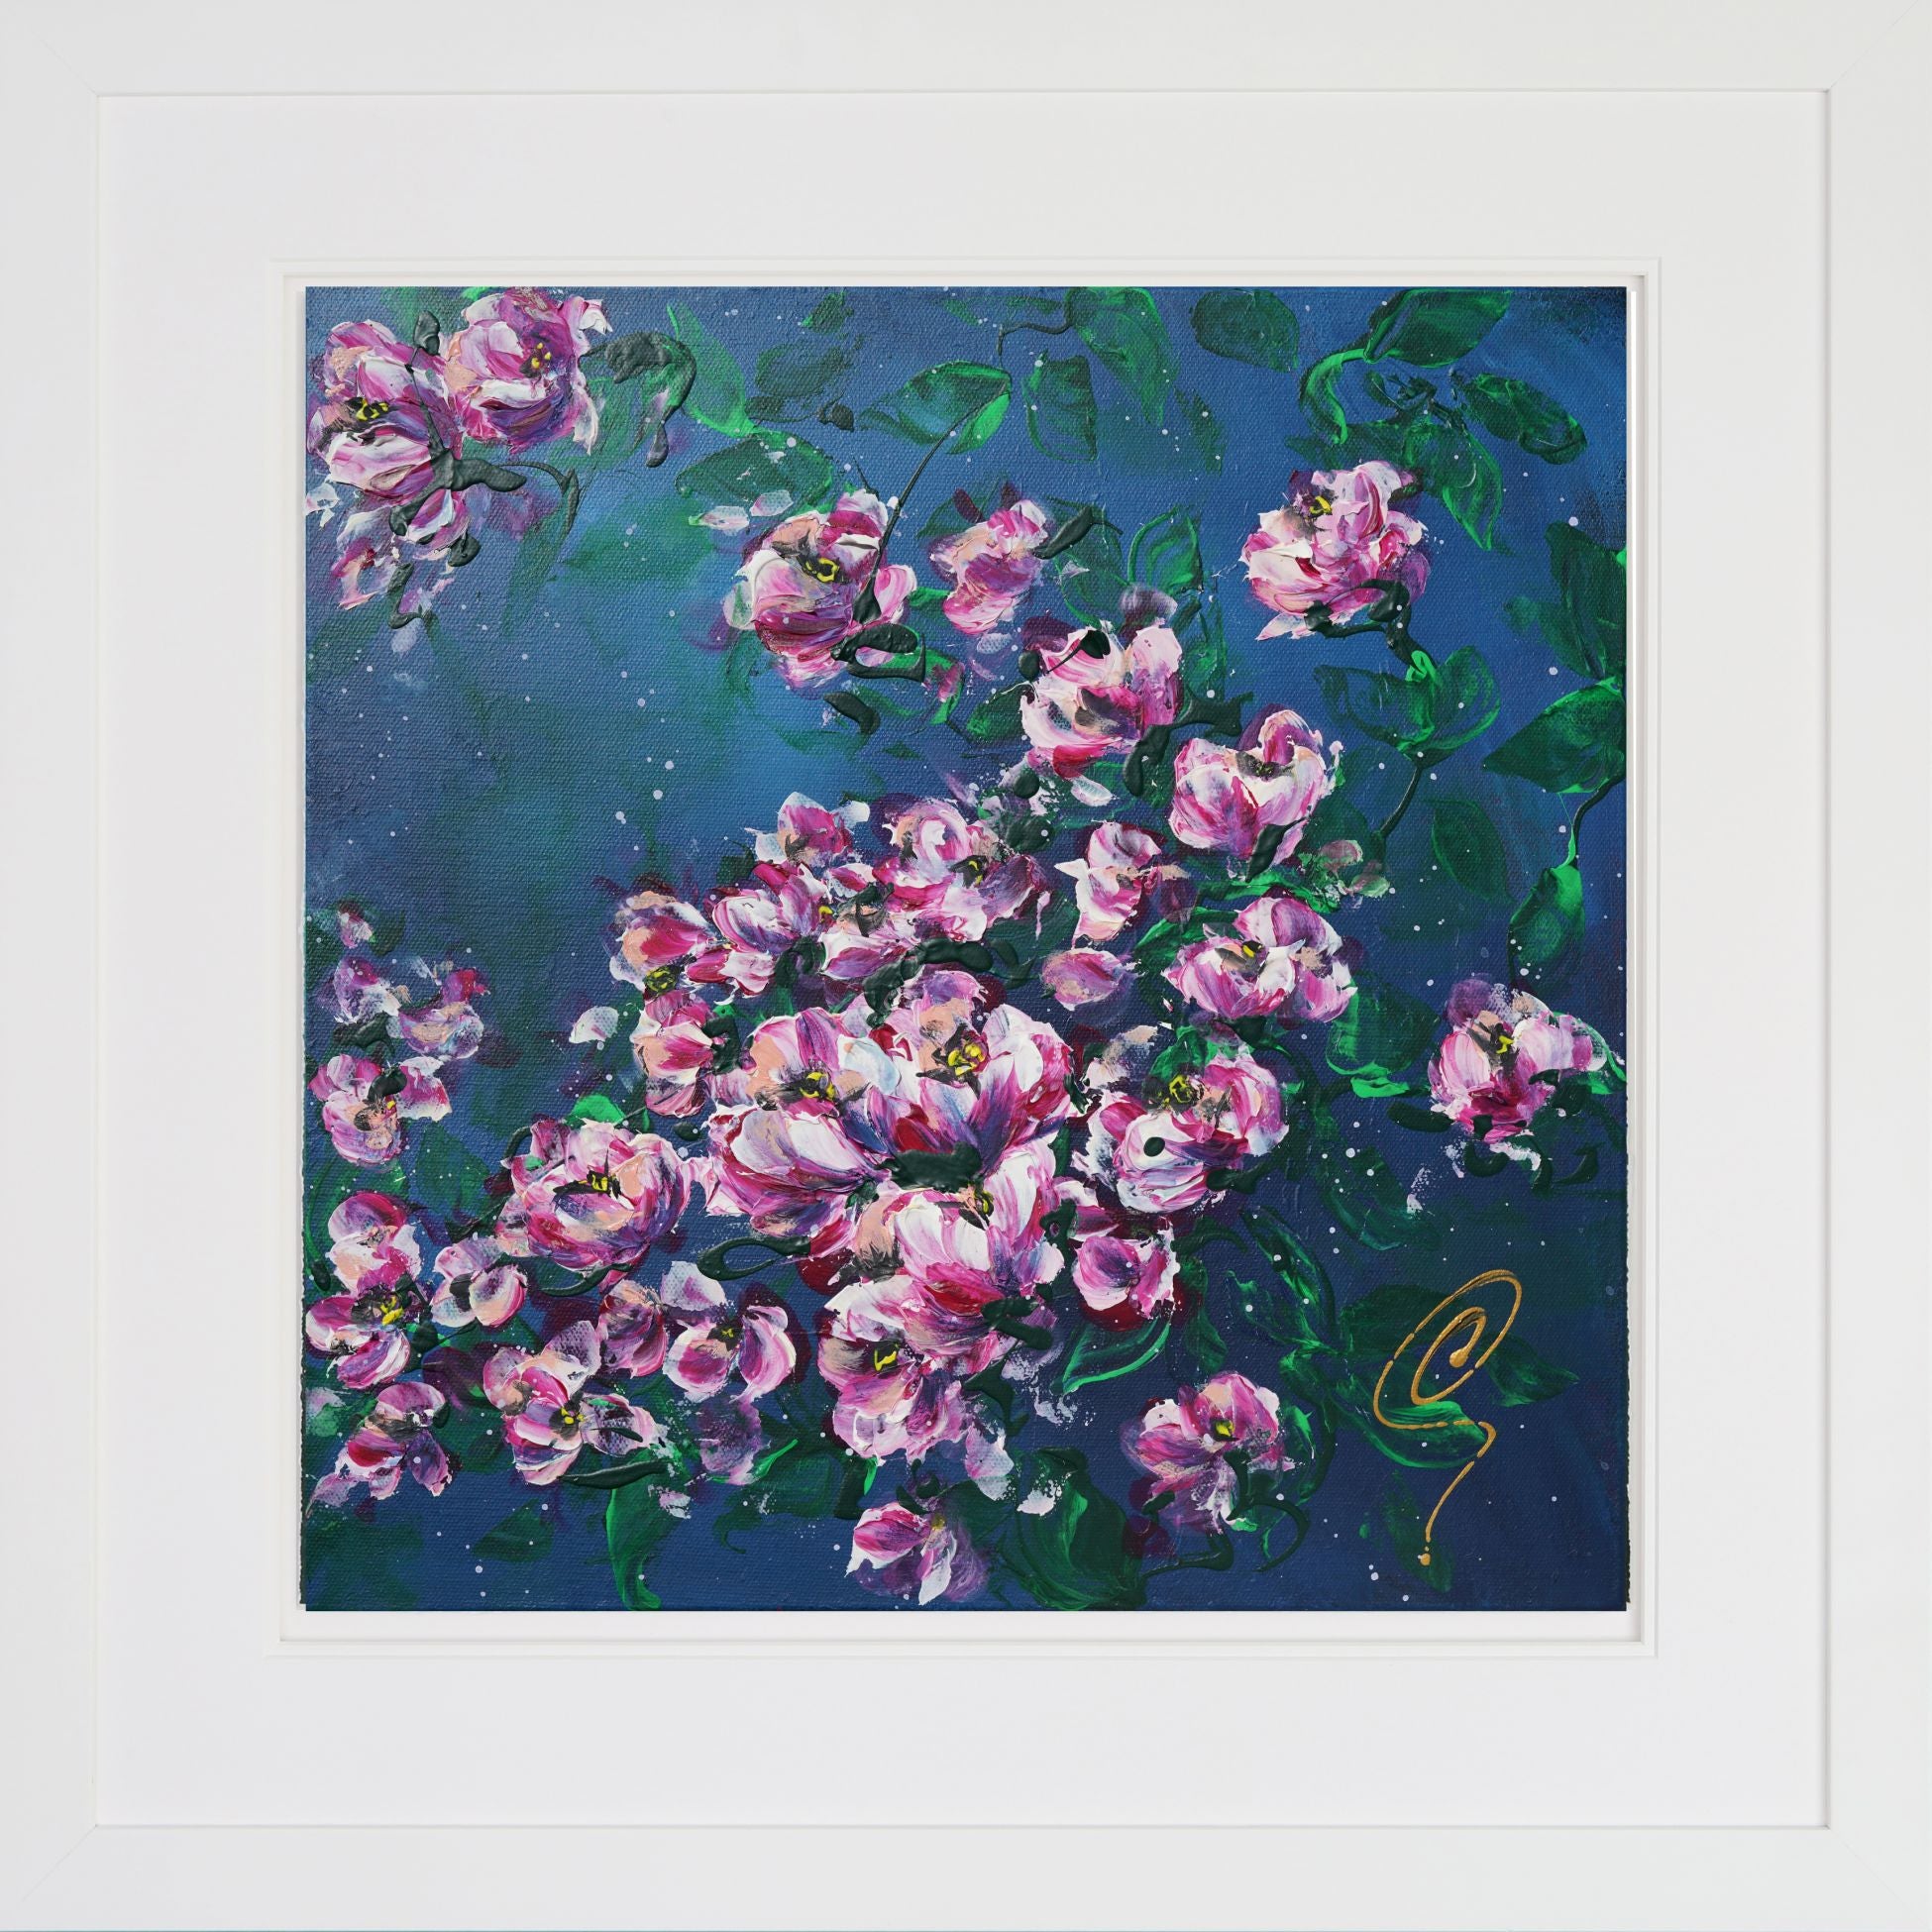 Clare Sykes - 'A Perfect Aroma' -  Framed Limited Edition